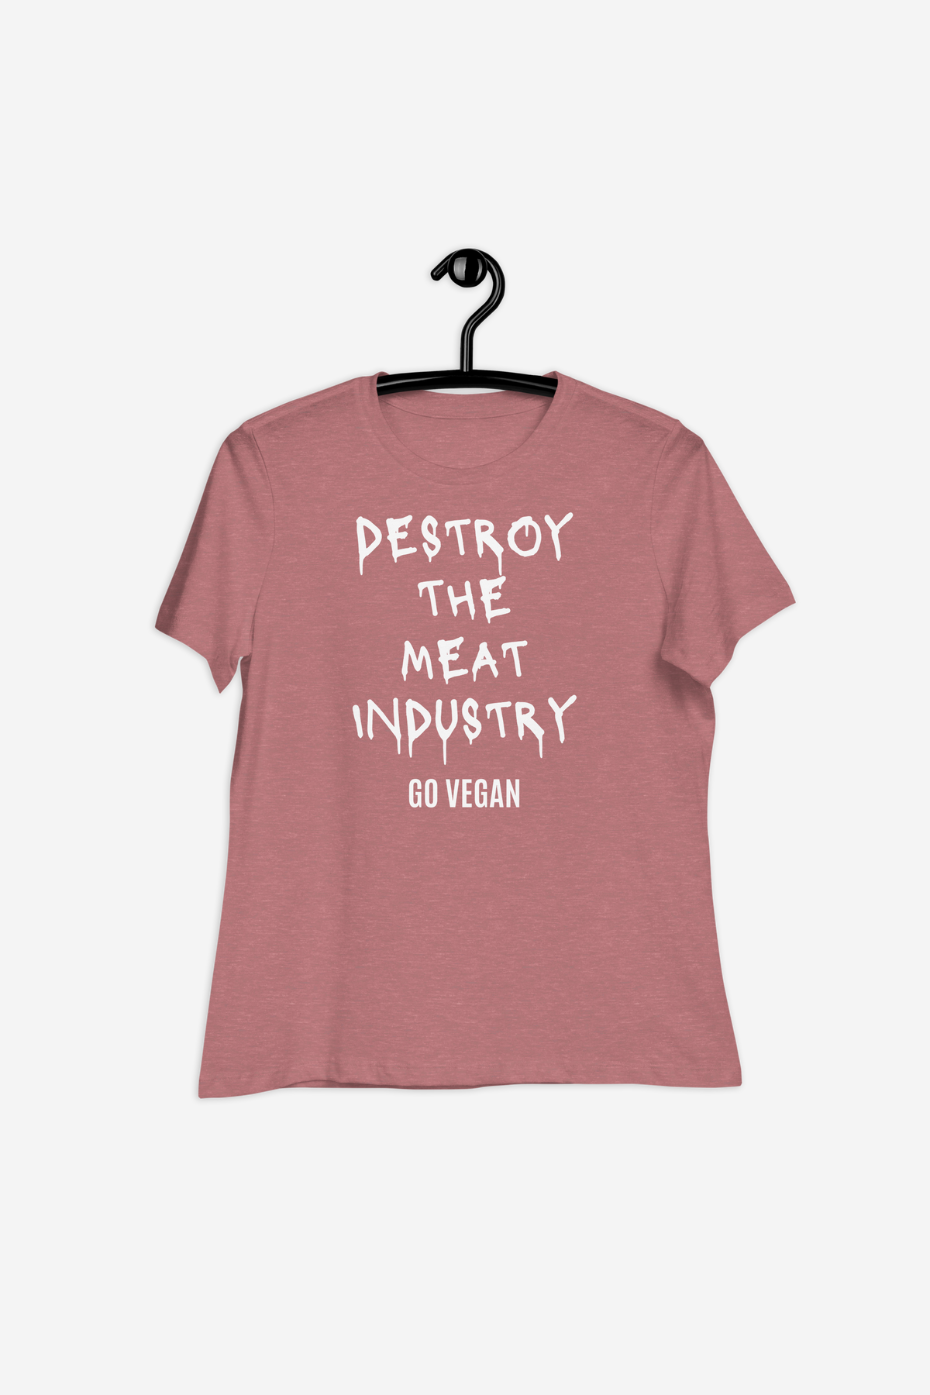 Destroy The Meat Industry Women's Relaxed T-Shirt